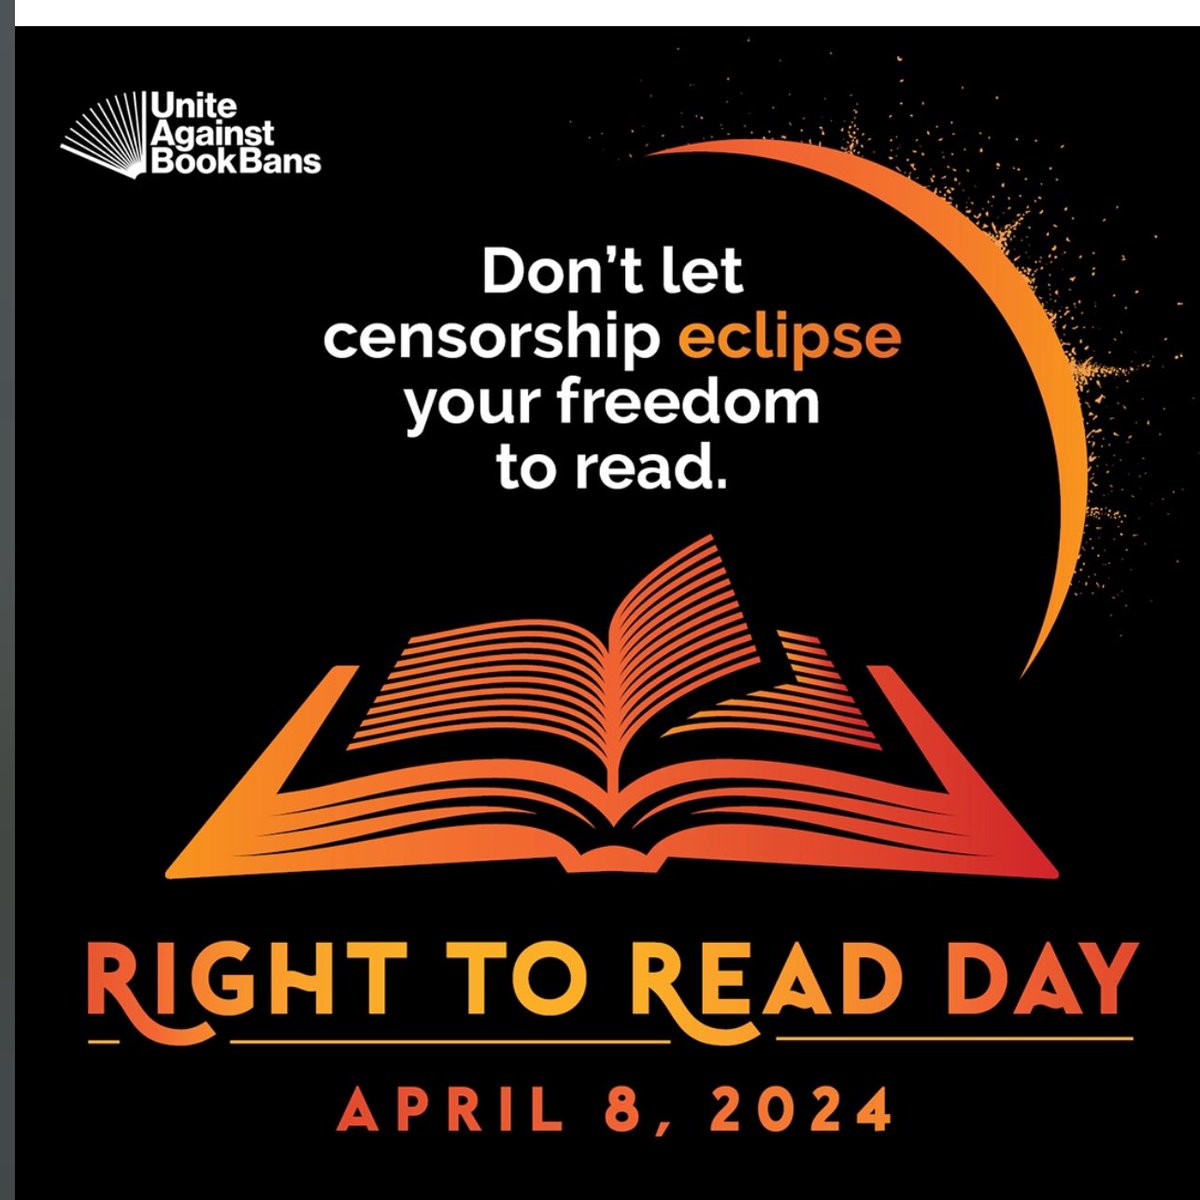 Today is #righttoreadday. Stop #bookbans. #freedomtoread #writersoftwitter #reader